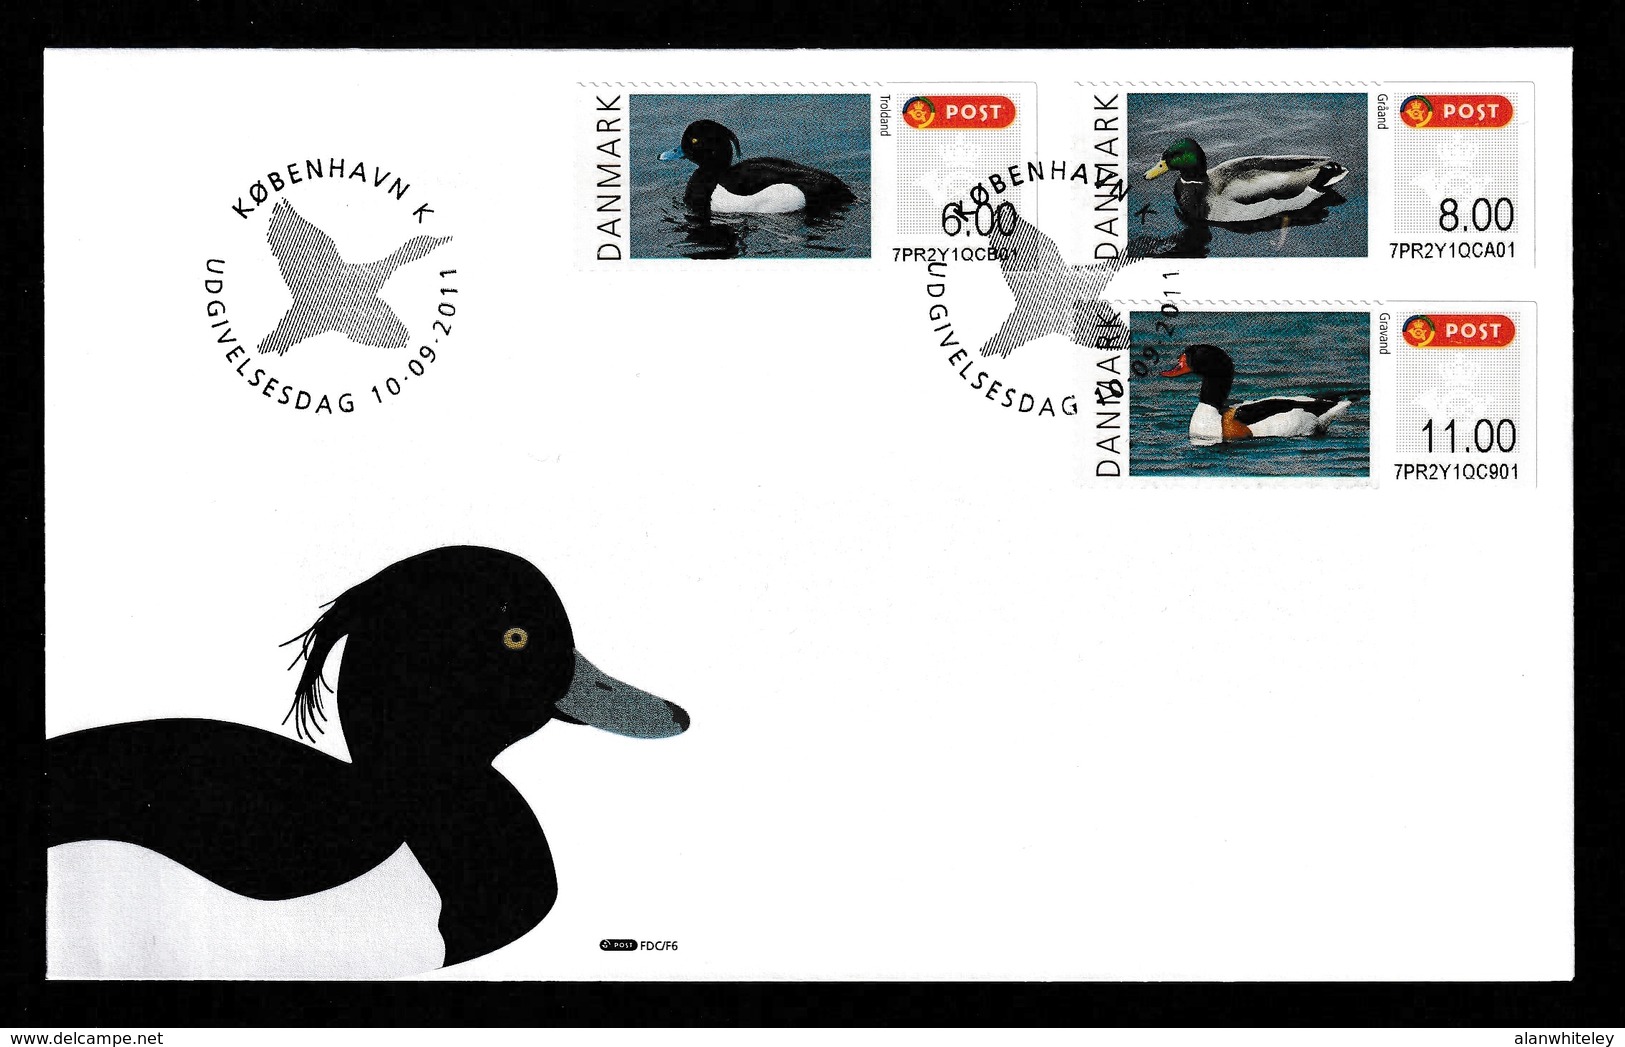 DENMARK 2011 FRAMA/Ducks: First Day Cover CANCELLED - Machine Labels [ATM]